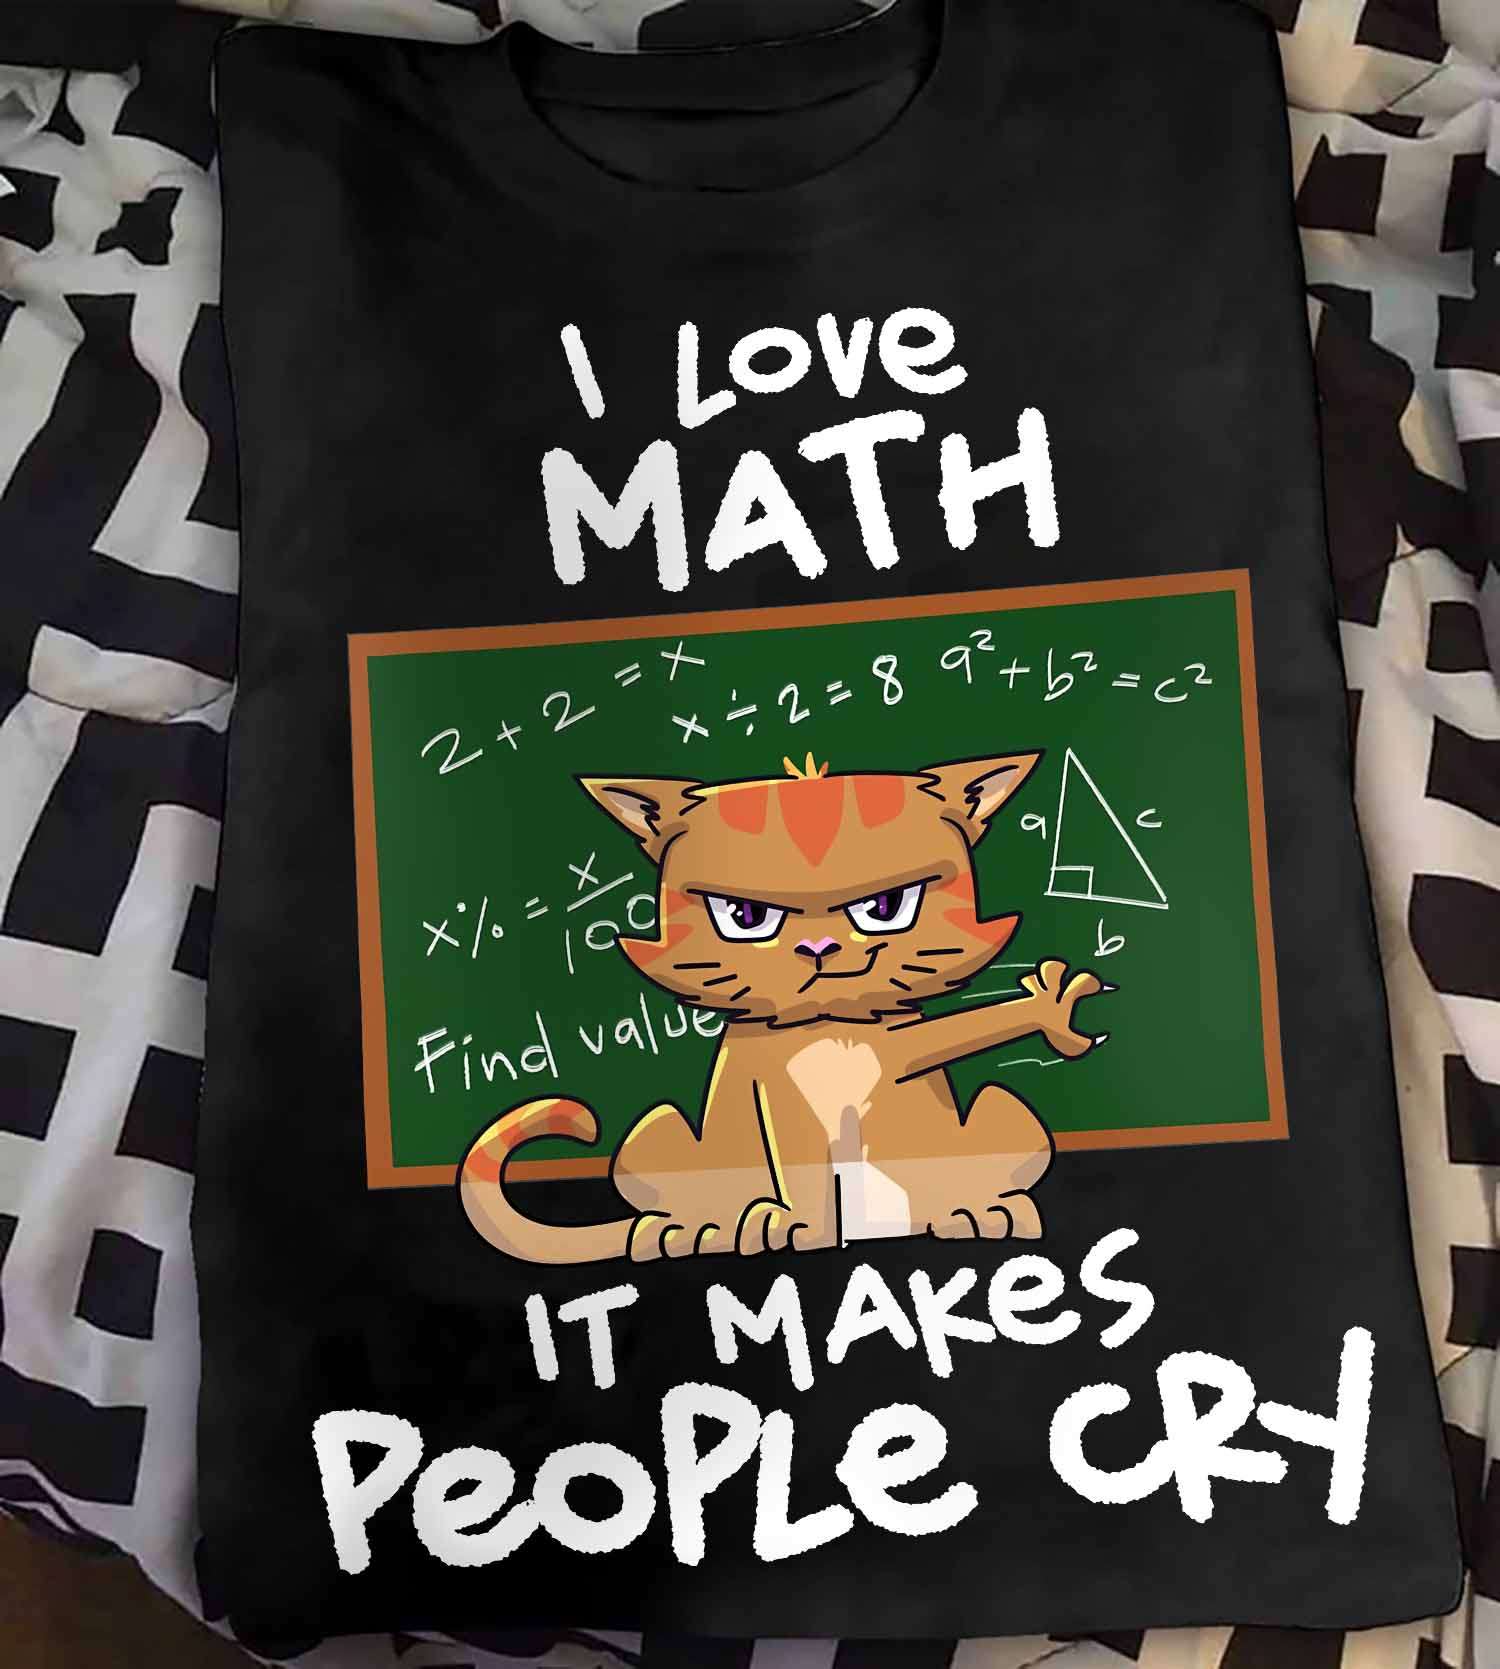 I love math, it makes people cry - Cat and math